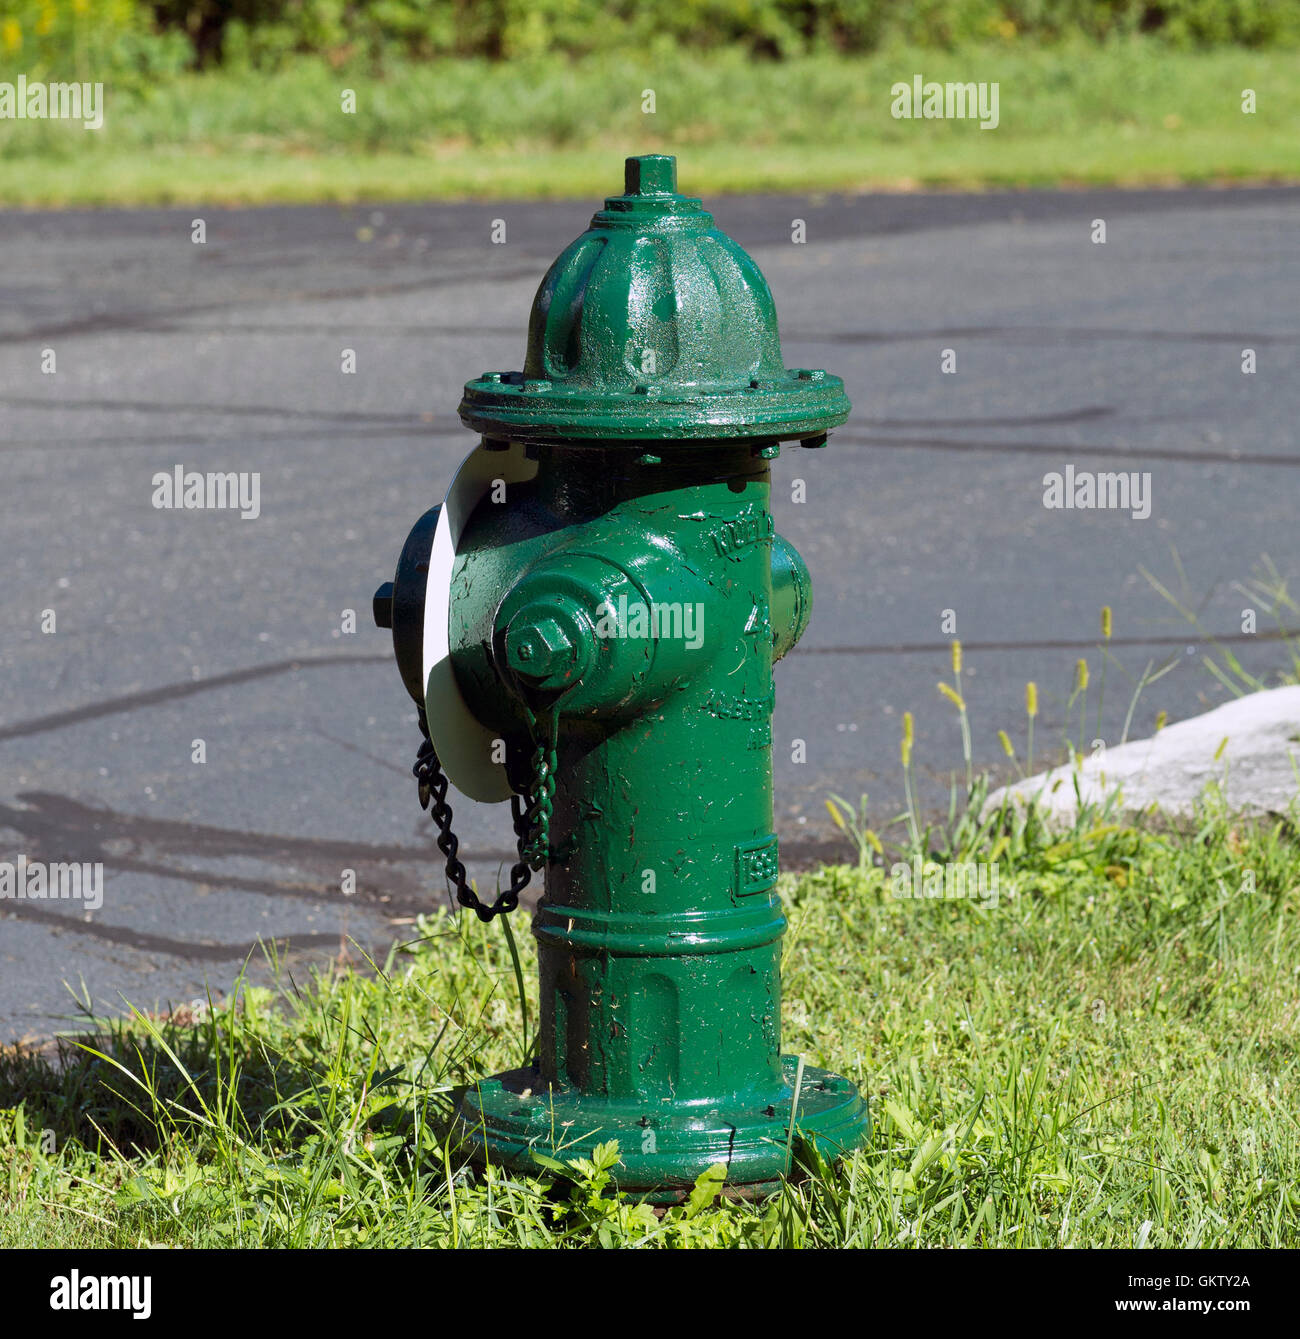 Rural green fire hydrant in the grass along side a country road. Stock Photo